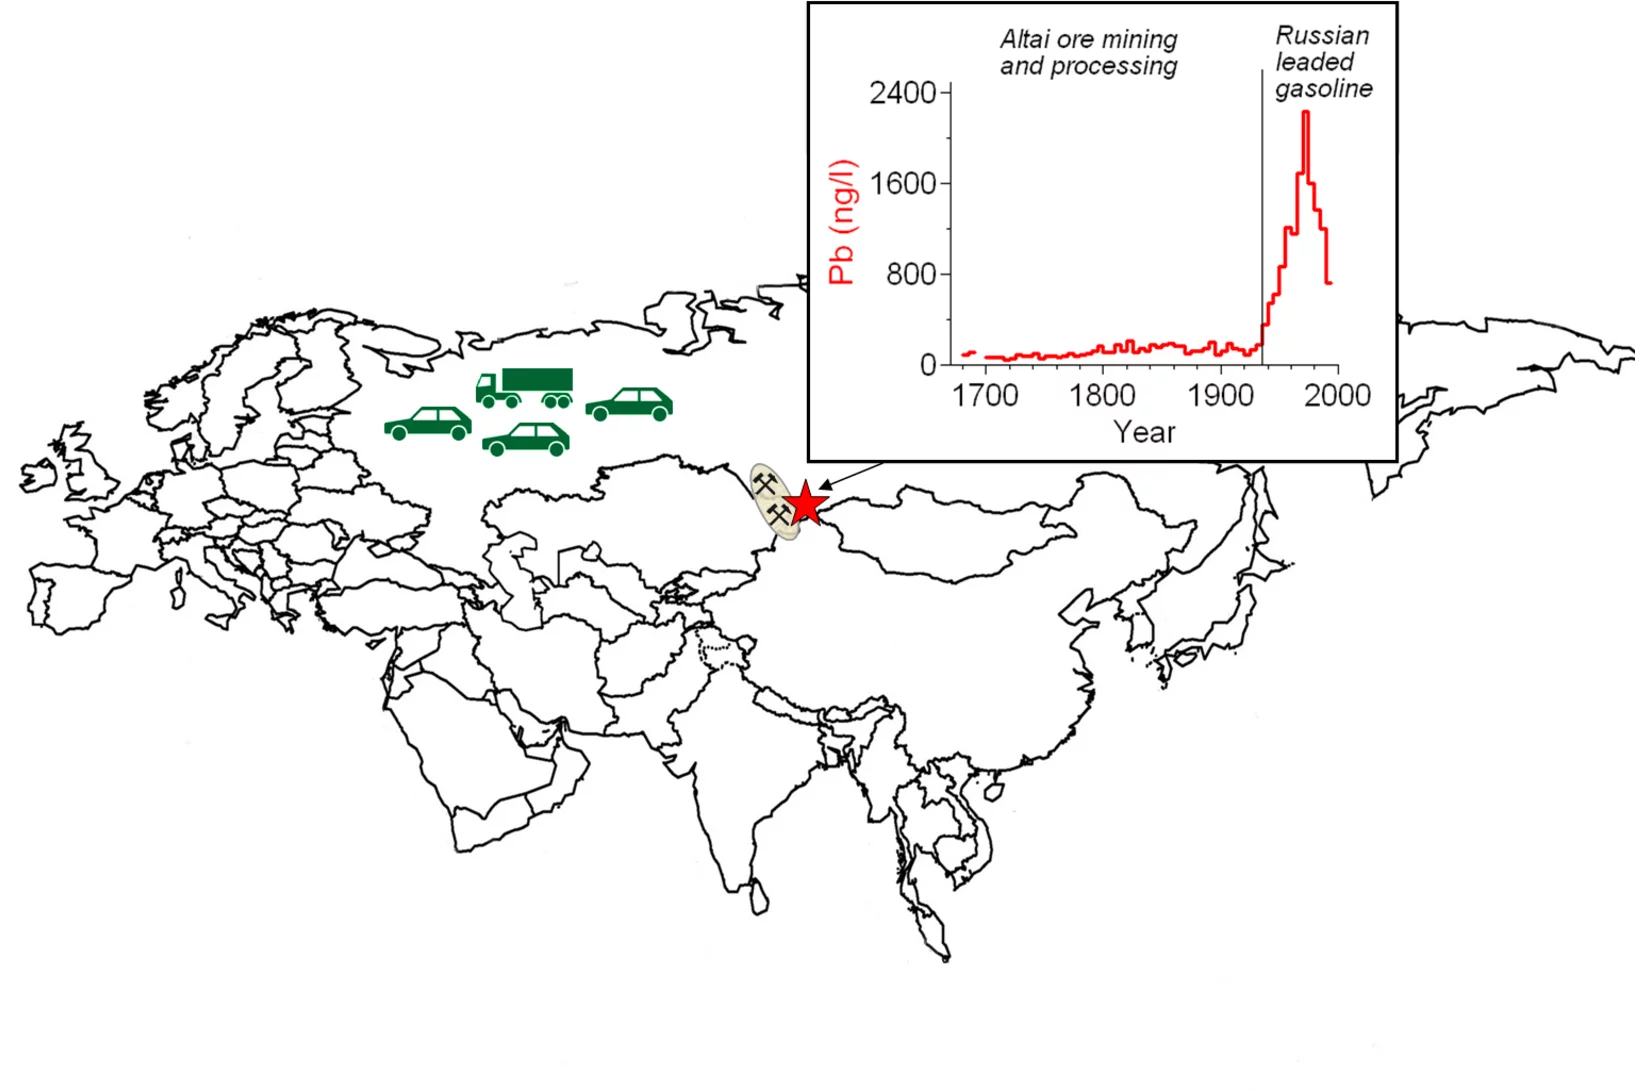 Lead (Pb) concentrations in Russia during the period 1680-1995 were reconstructed using an ice core from Belukha glacier in the Siberian Altai. Until the 1930s Pb originated mainly from ore mining for the production of Russian coins, whereas enhanced Pb concentrations in the period 1935-1995 can be related to Pb emissions from Russian leaded gasoline.